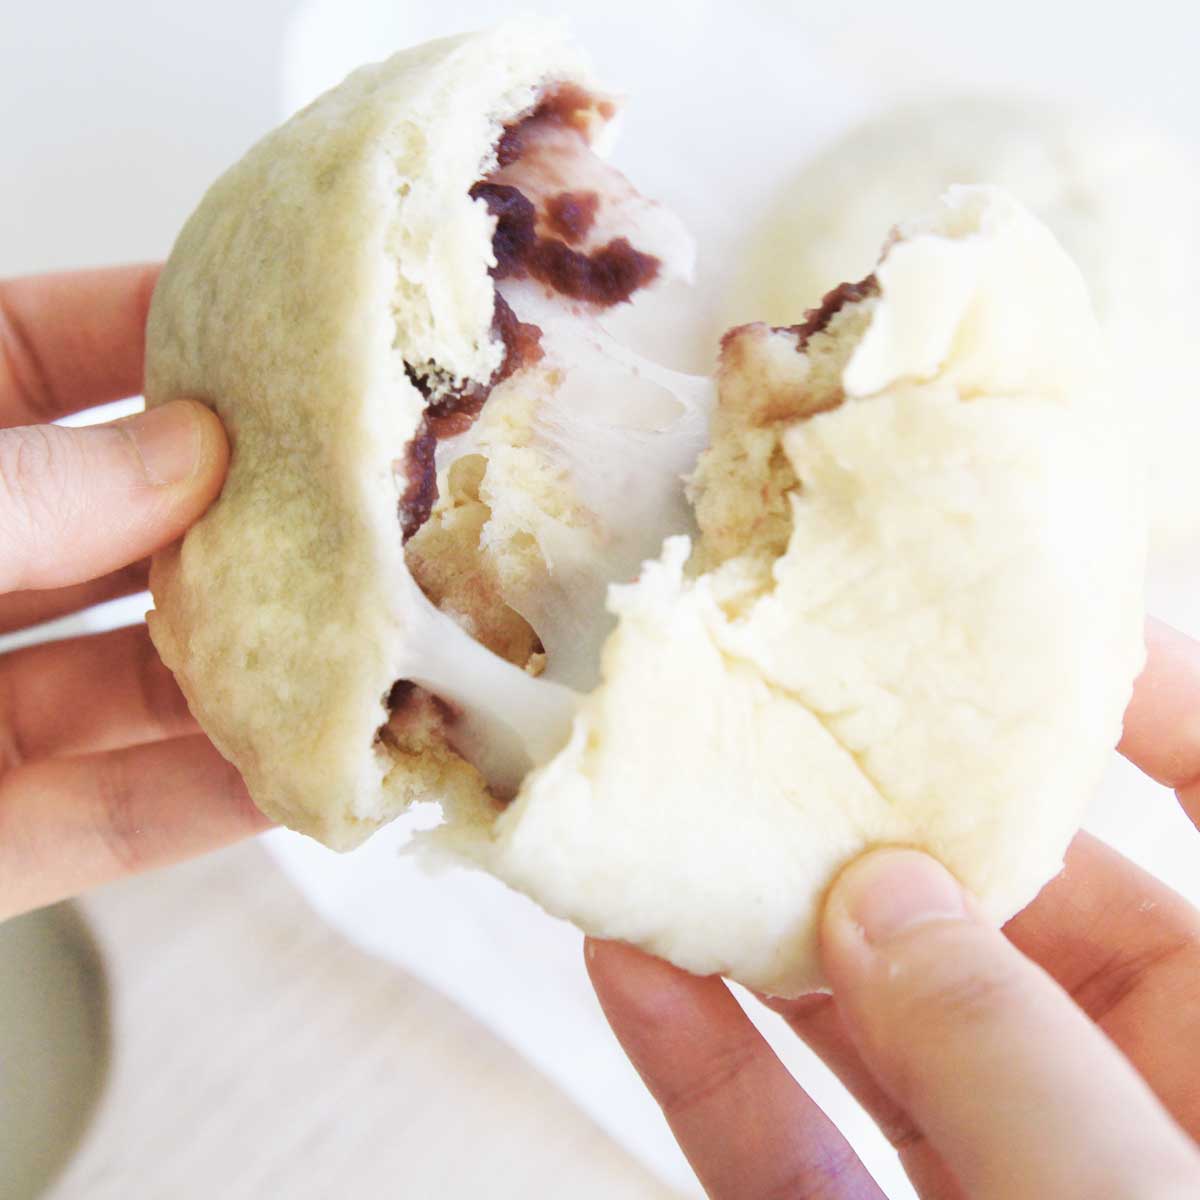 Tofu Steamed Buns with Mochi Filling (Yeasted, Japanese Style Recipe) - Red Bean Mochi Cake